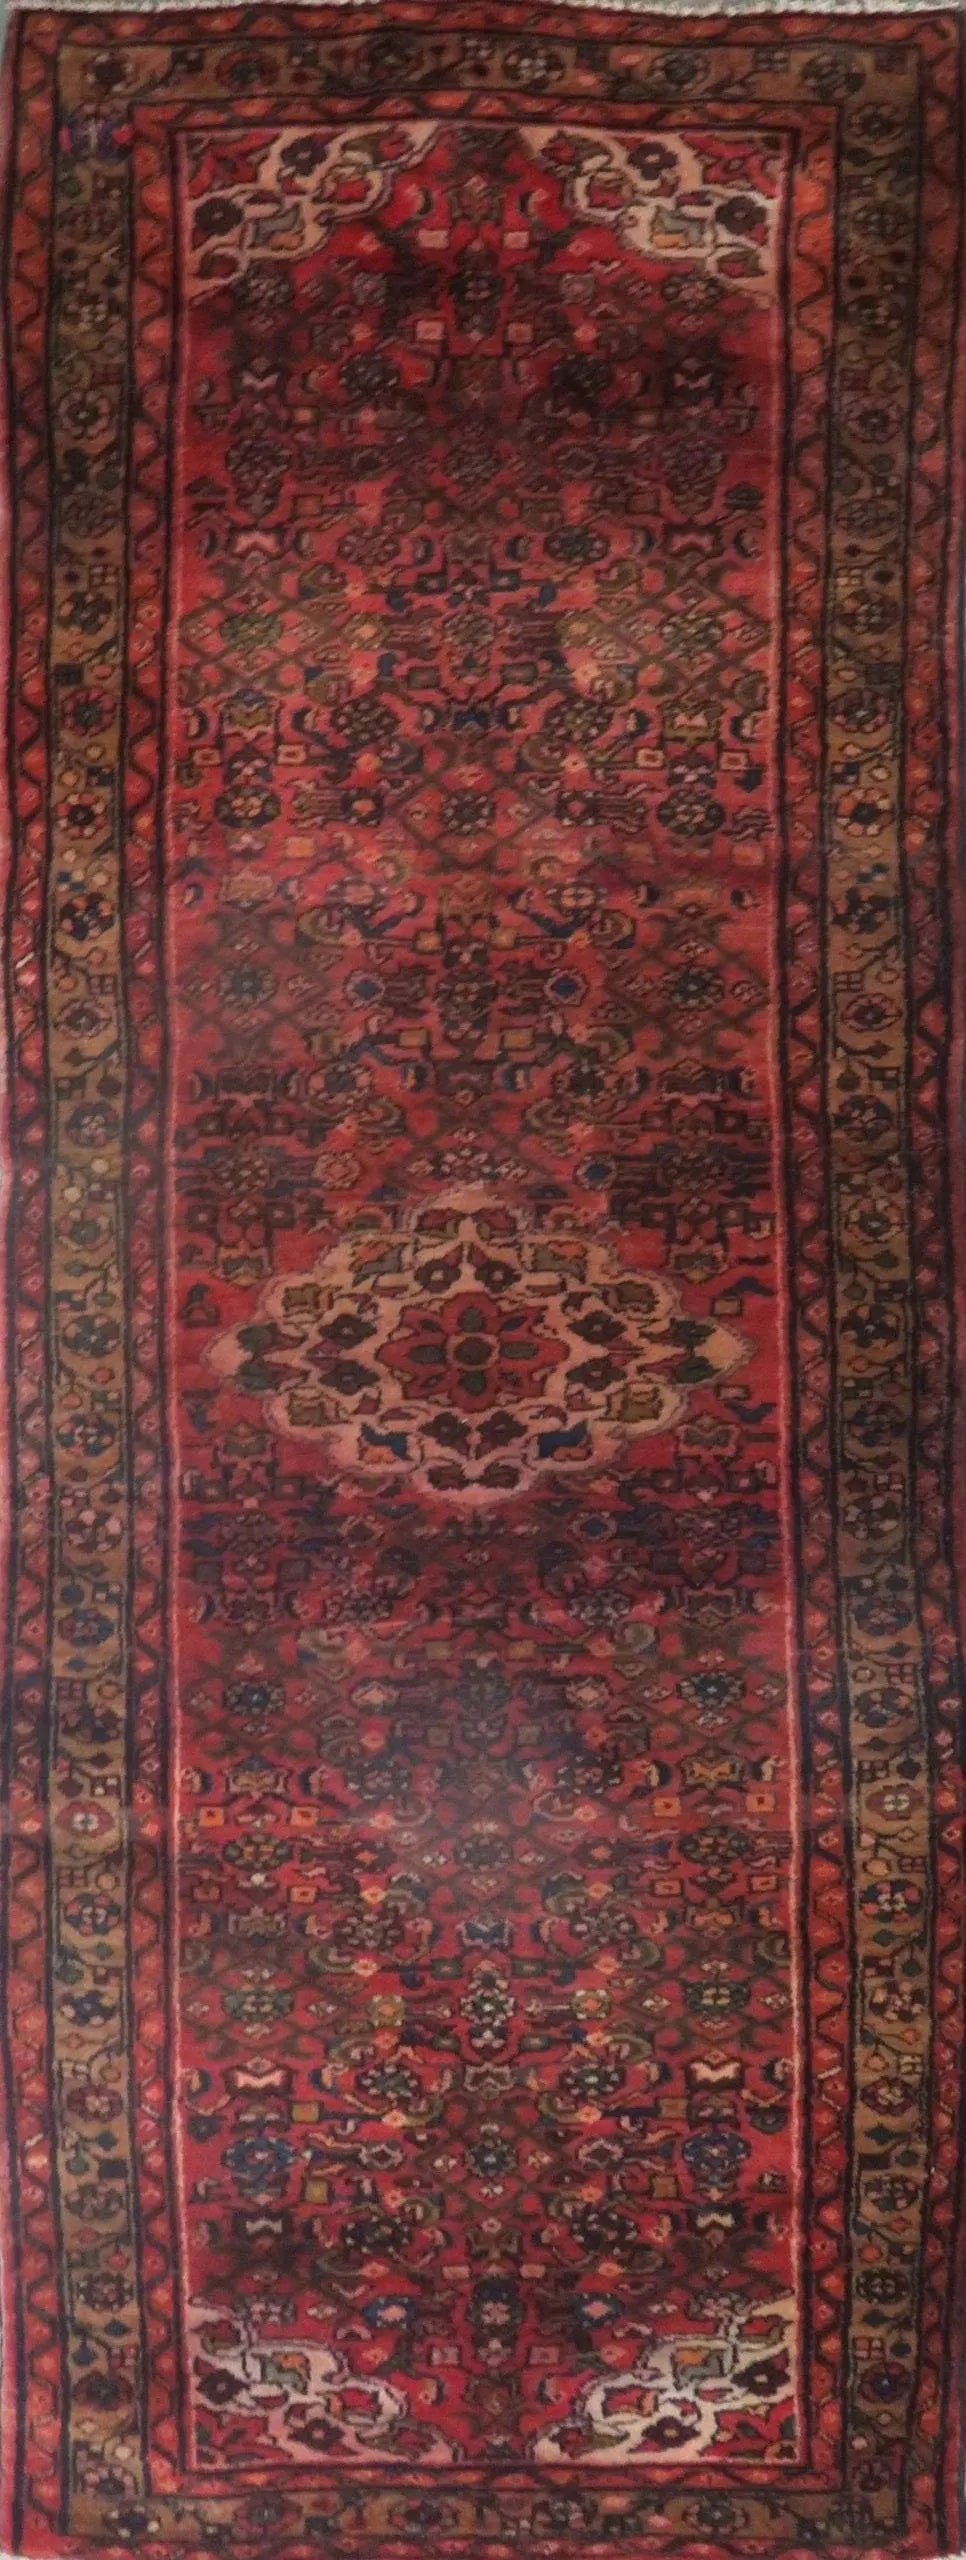 Hand-Knotted Persian Wool Rug _ Luxurious Vintage Design, 11'3" x 3'8", Artisan Crafted